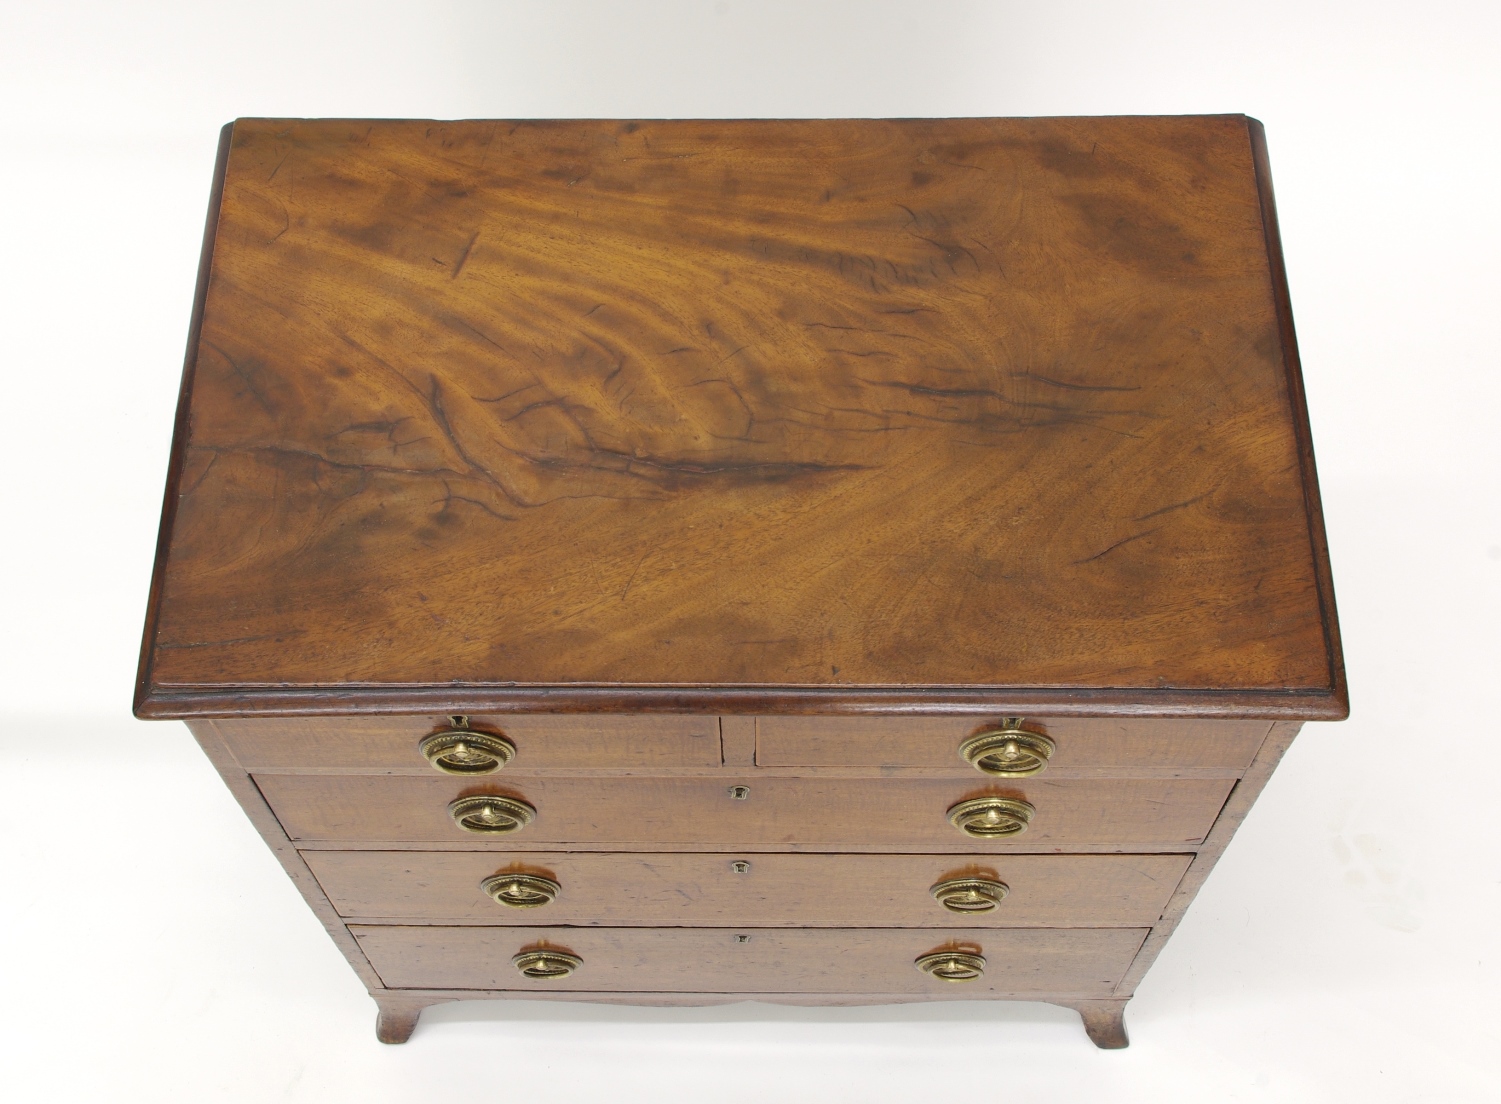 George III Fiddleback Mahogany Small Chest of Drawers, c. 1790